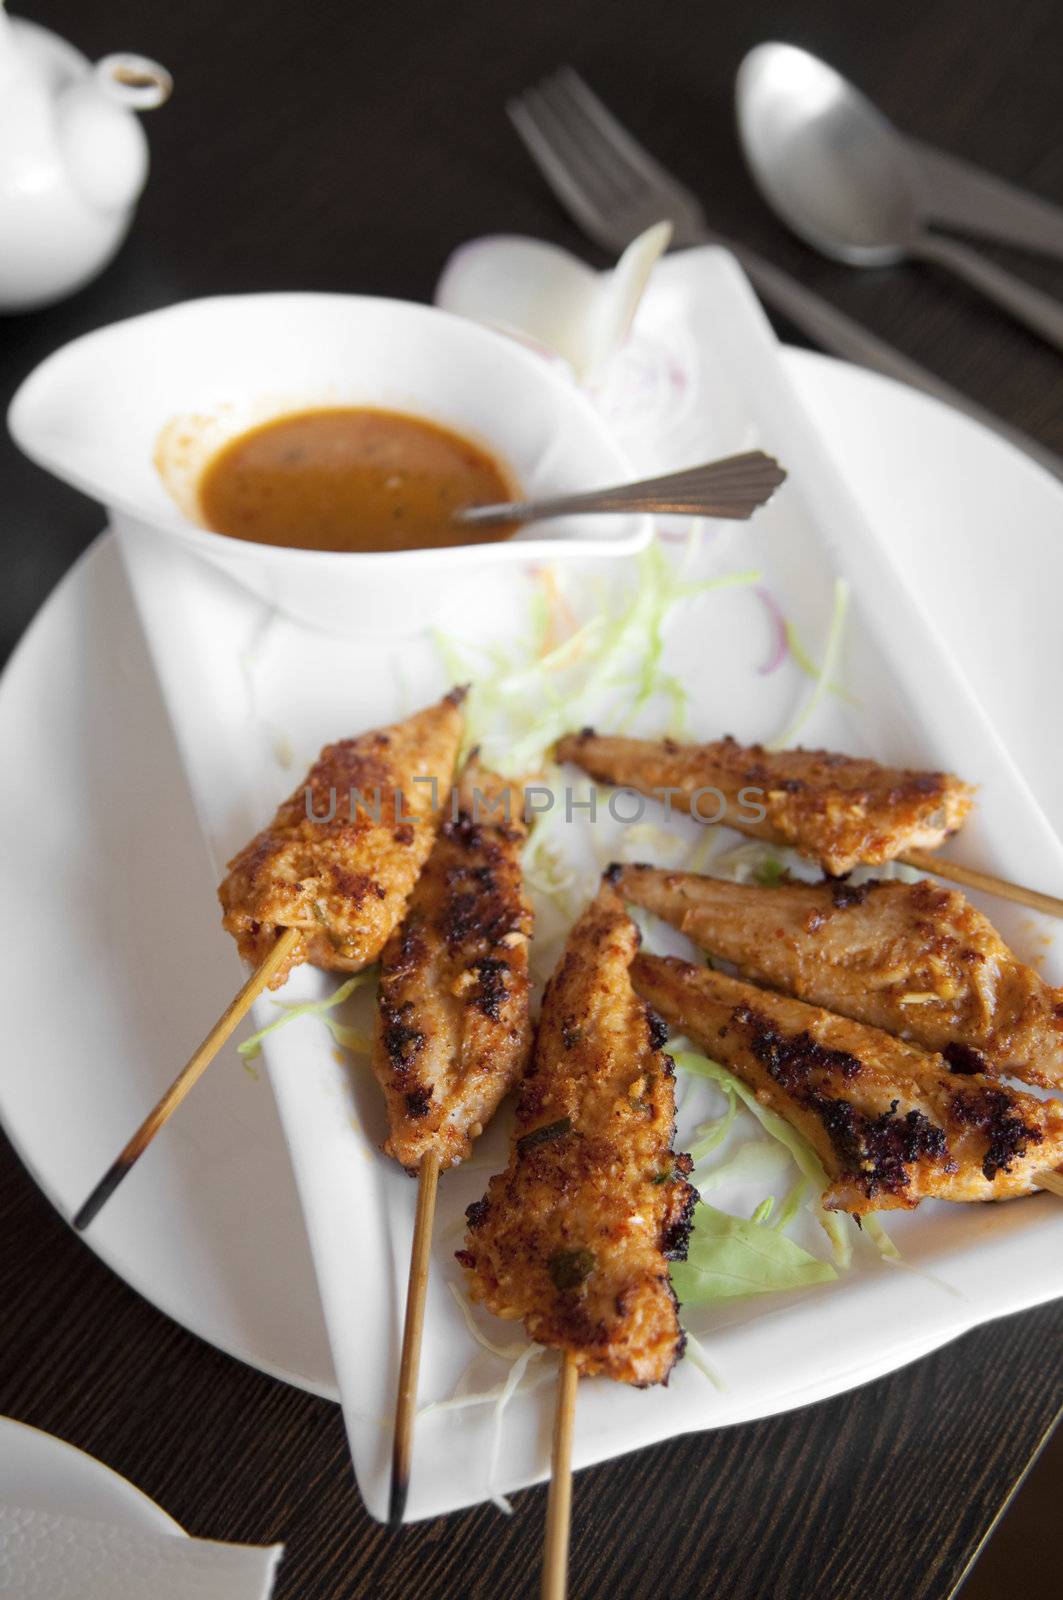 Delicious chicken satay on skewers